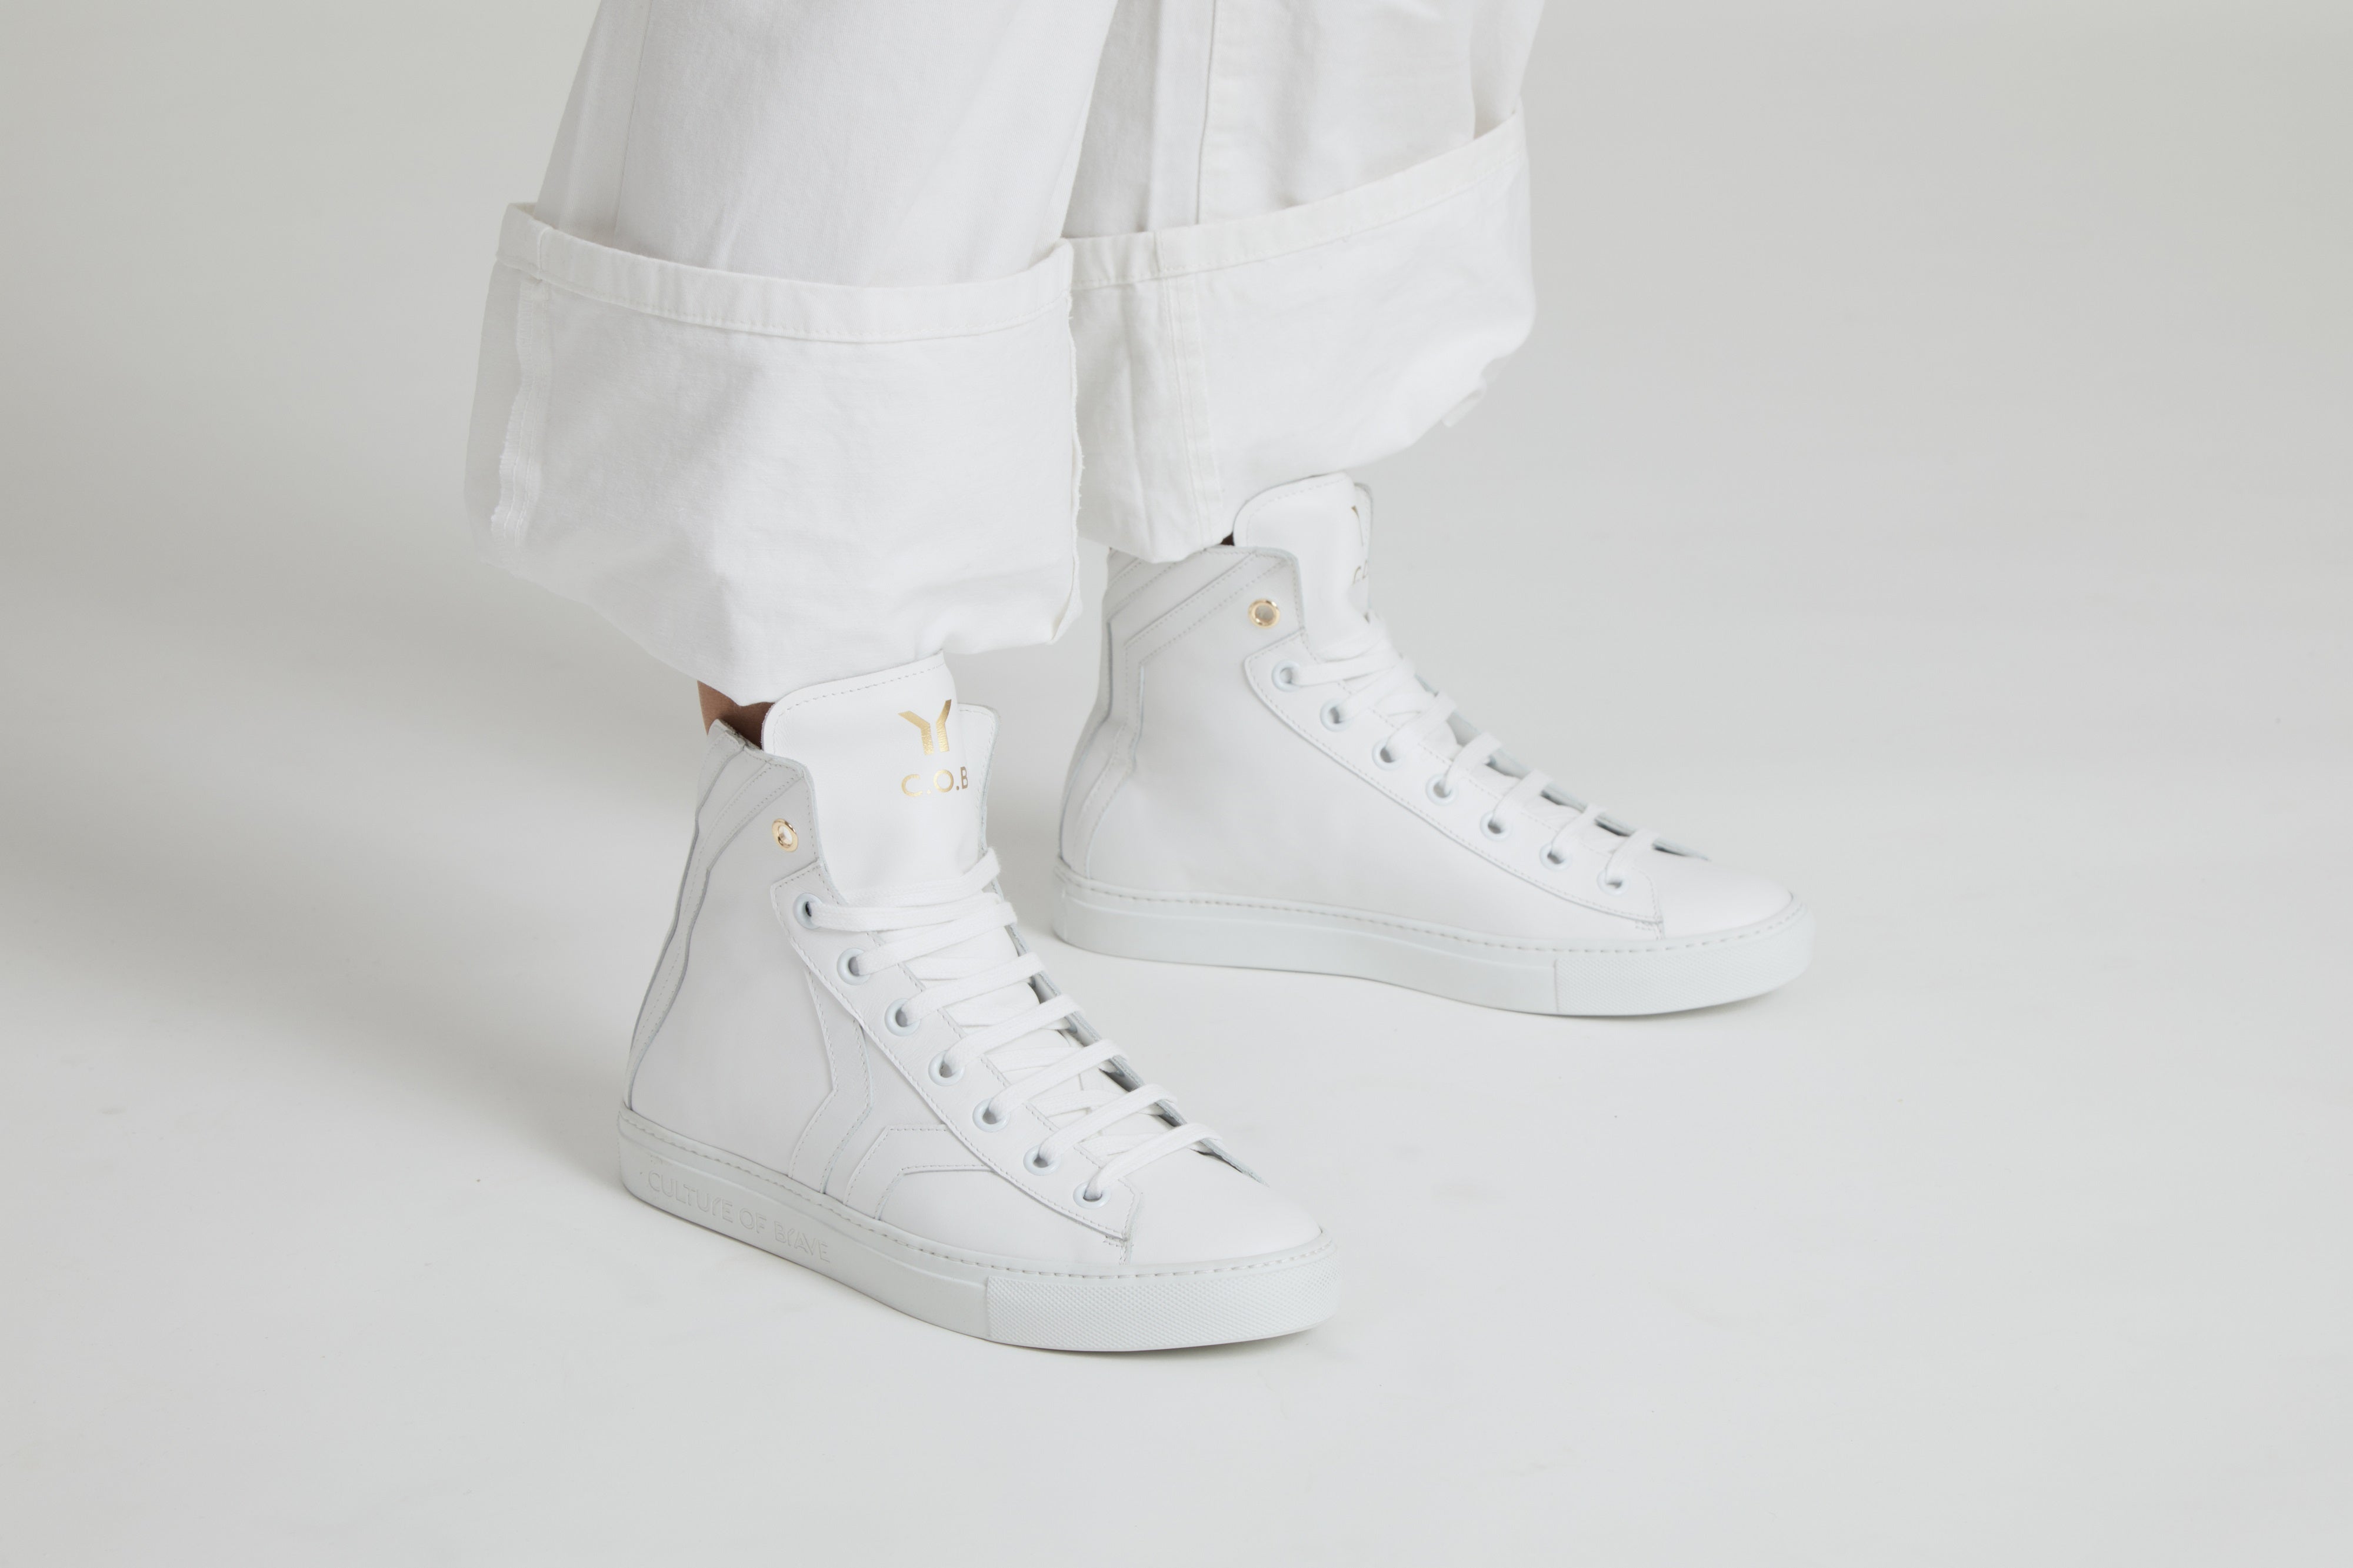 Women's Resilient – Mid Cut Leather Italian Sneakers | Culture of Brave